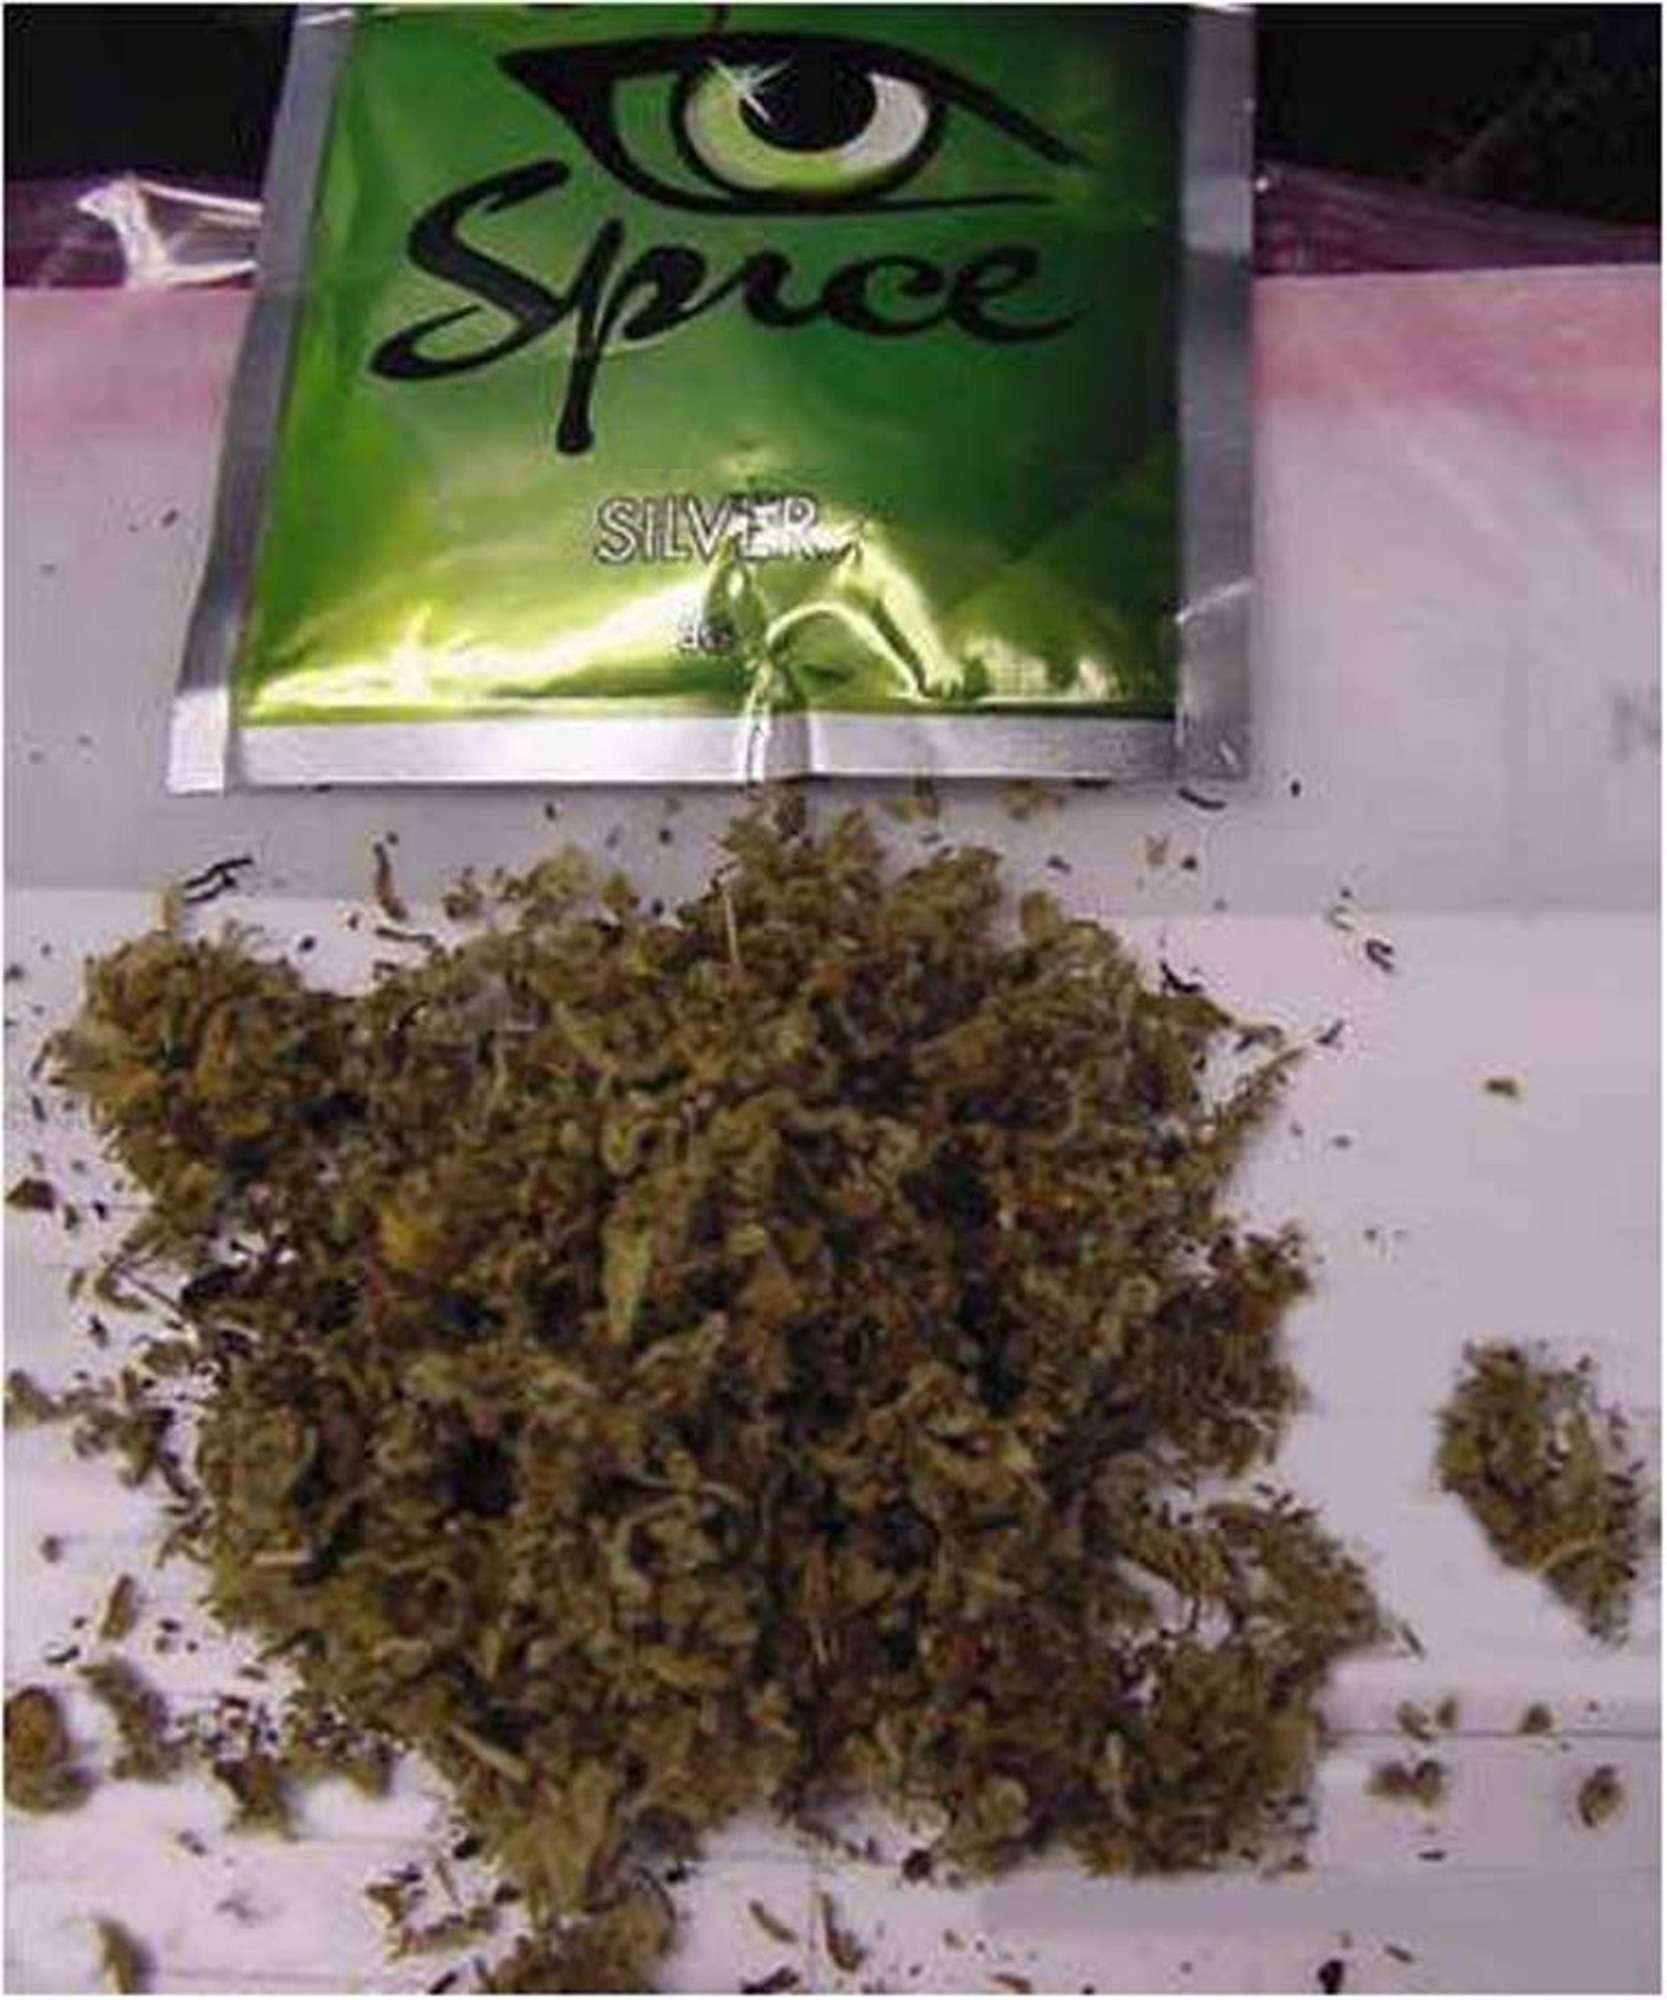 Spice isn't nice – or legal > Dover Air Force Base > News